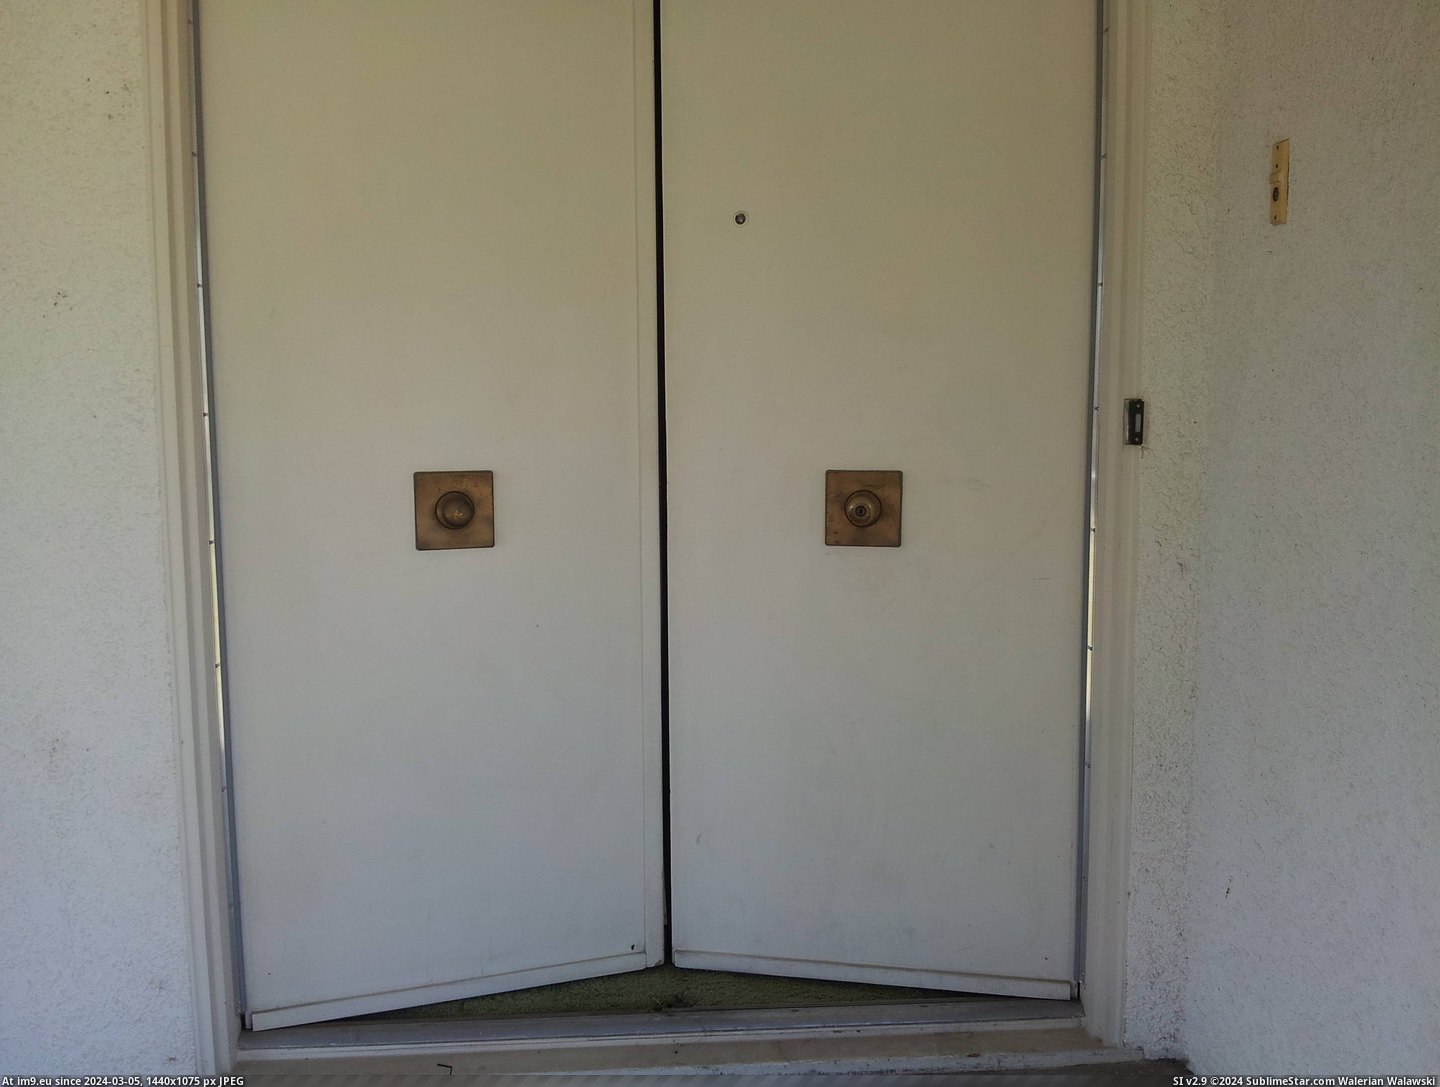 #Sister #House #Knobs #Door #Moved [Mildlyinteresting] My sister just moved into a house with door knobs in the middle of the door. 1 Pic. (Bild von album My r/MILDLYINTERESTING favs))